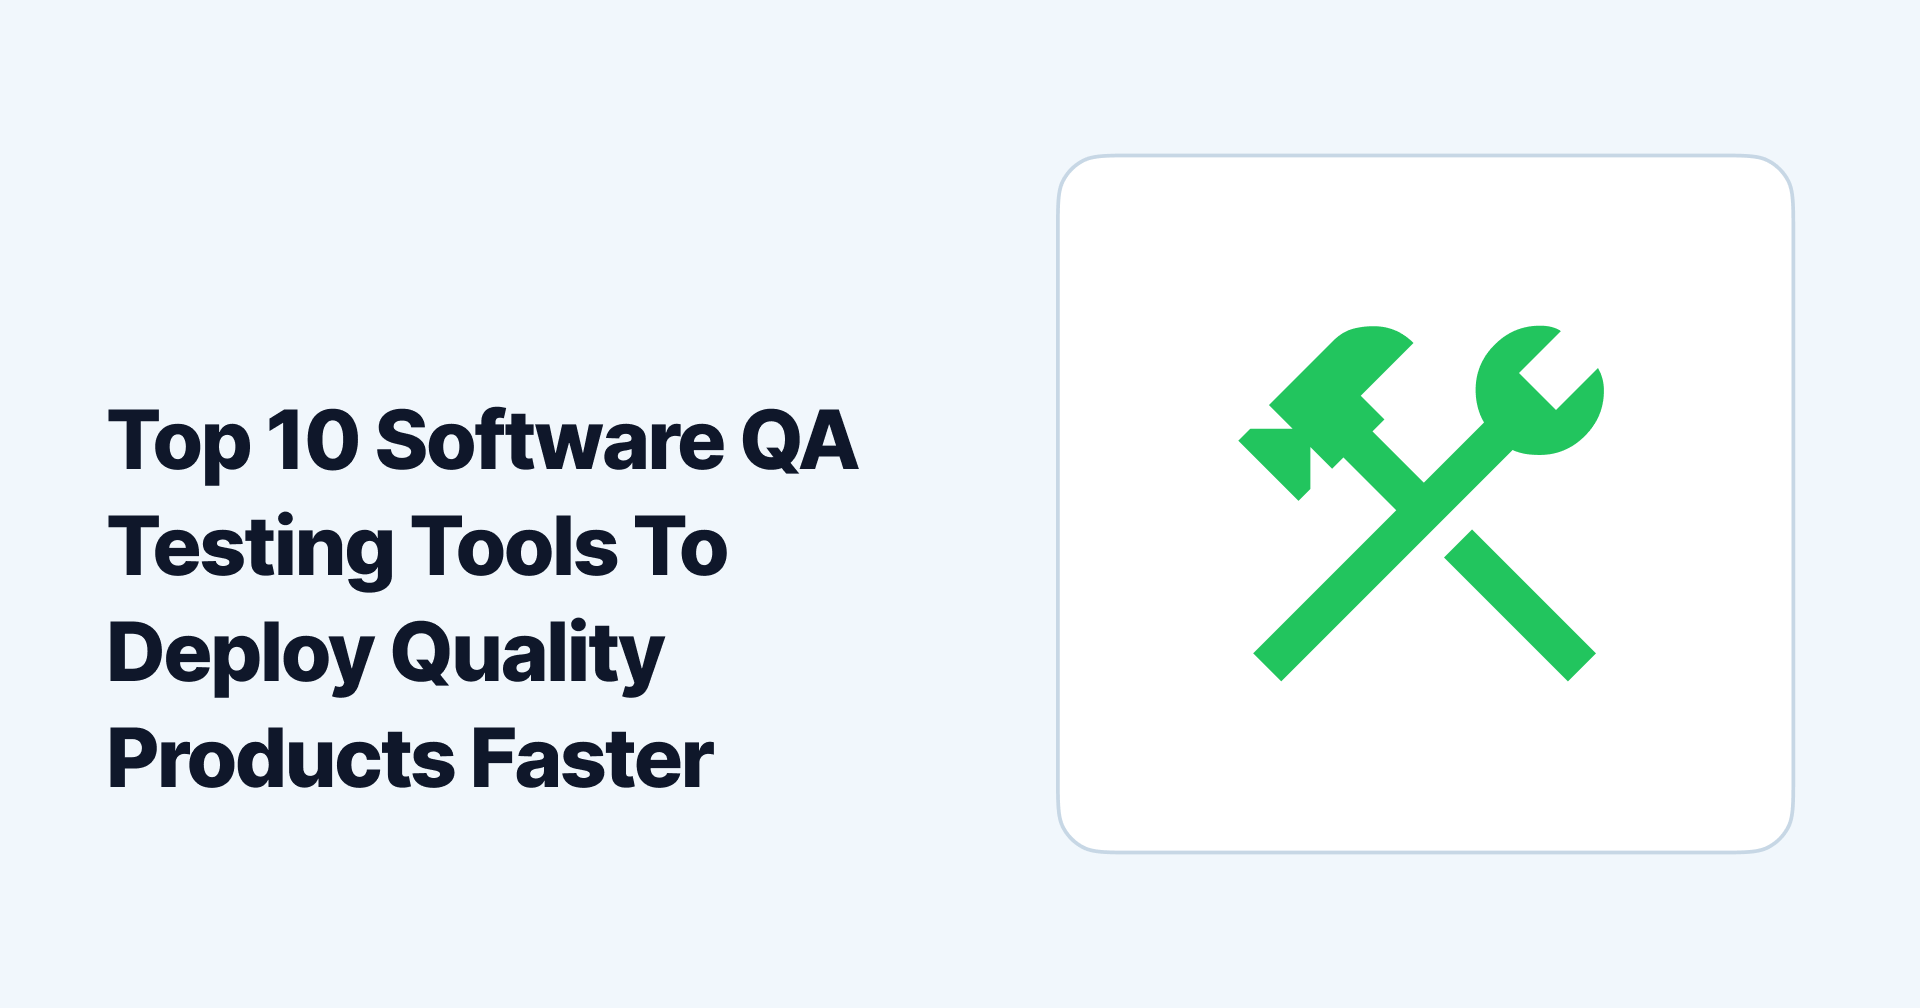 Top 10 Software QA Testing Tools To Deploy Quality Products Faster